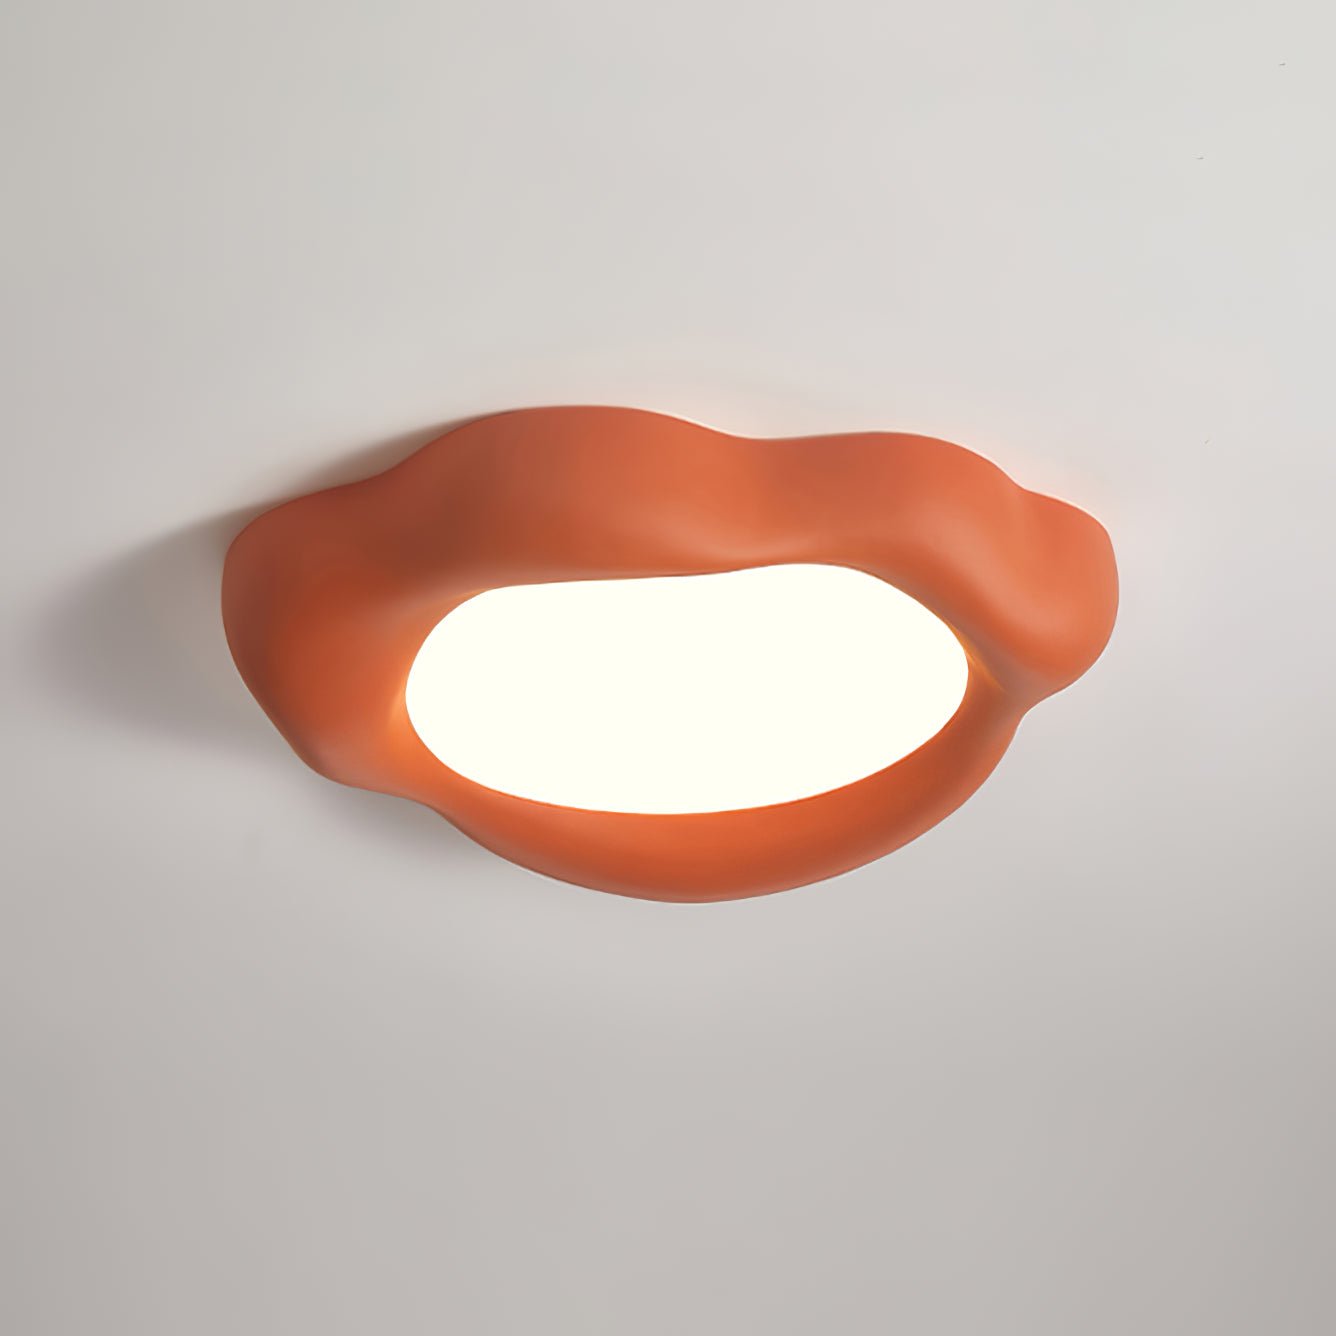 The Orange Kumo Ceiling Lamp offers a refreshing cool white light, measuring 21.6" in diameter and 3.9" in height (or 55cm x 10cm).